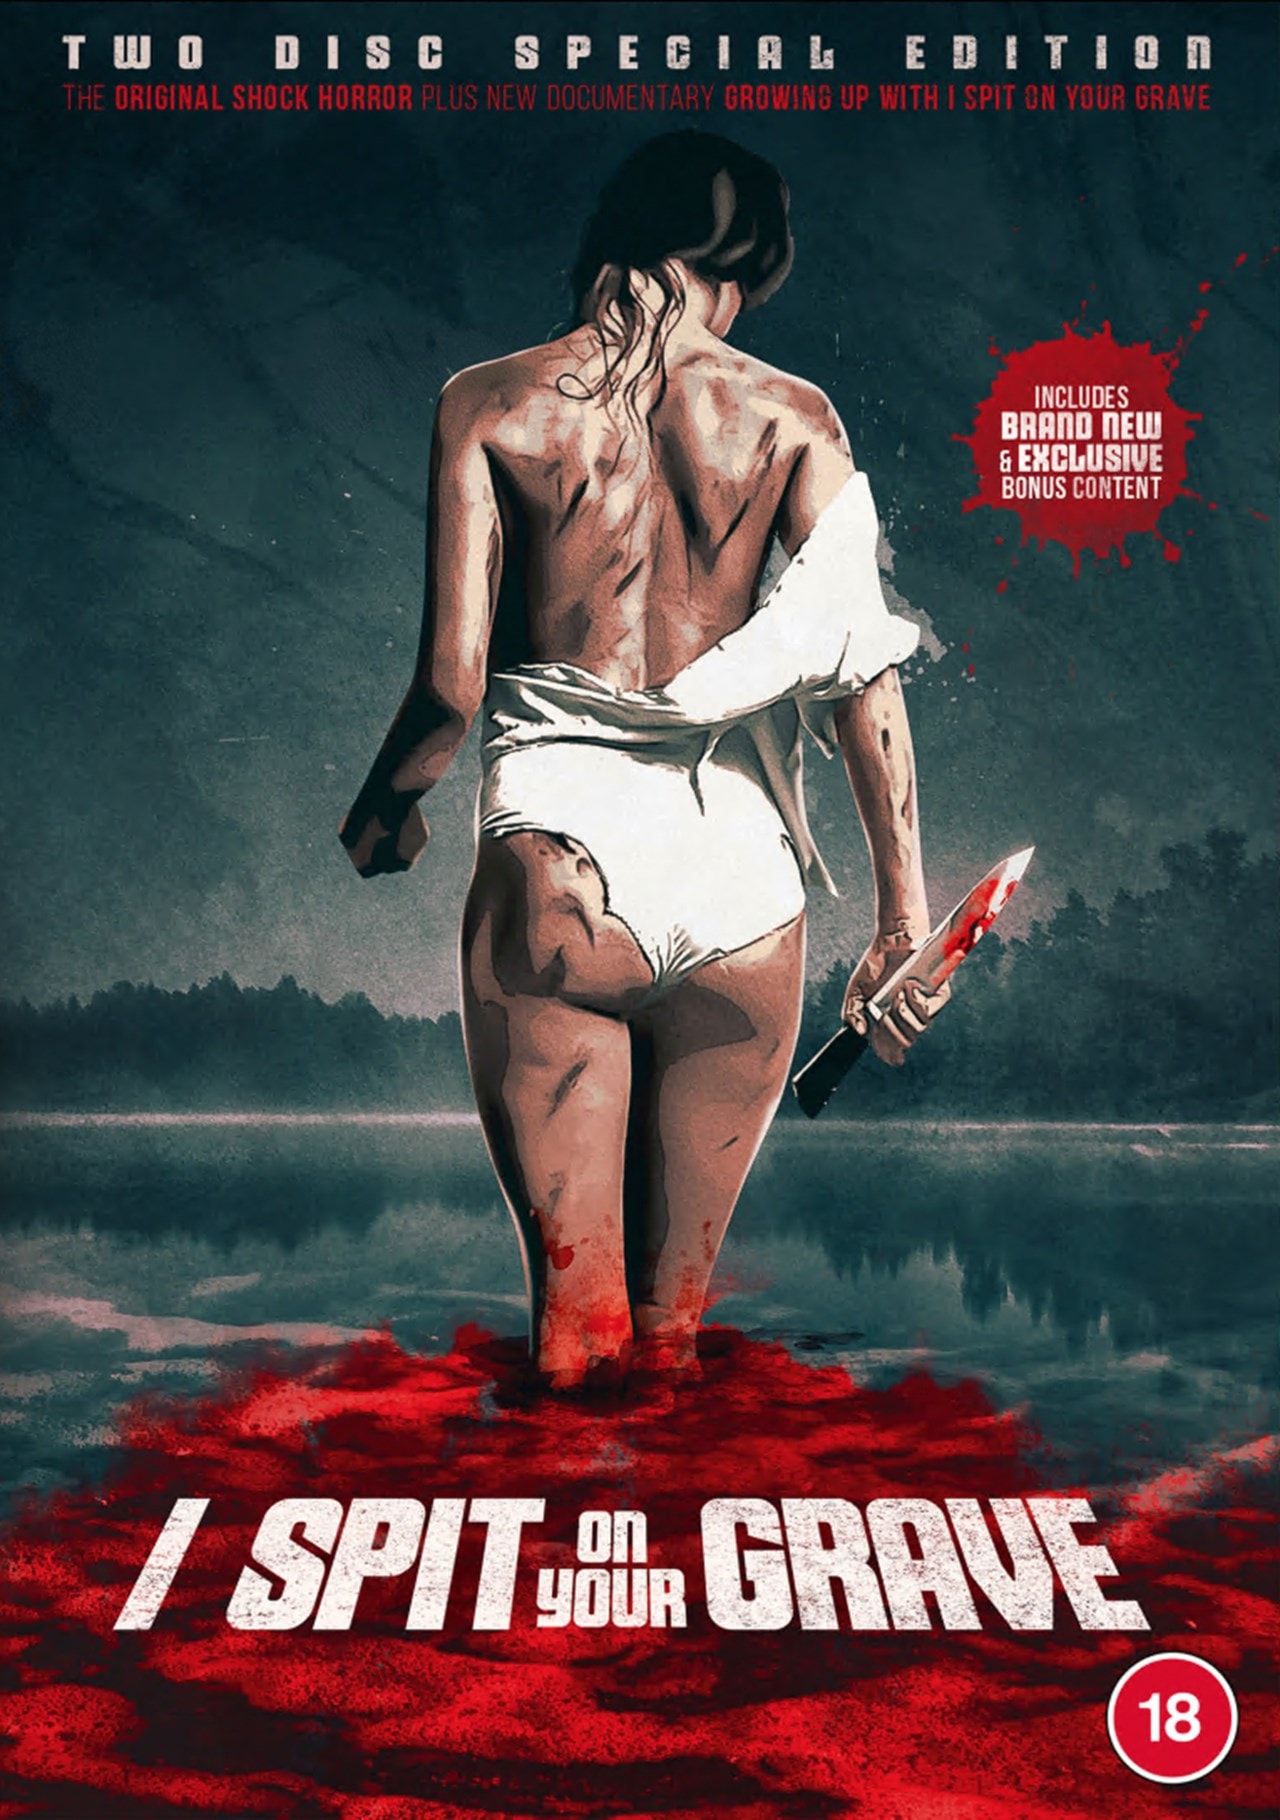 I Spit On Your Grave | DVD | Free shipping over £20 | HMV Store - I Spit On Your Grave Online